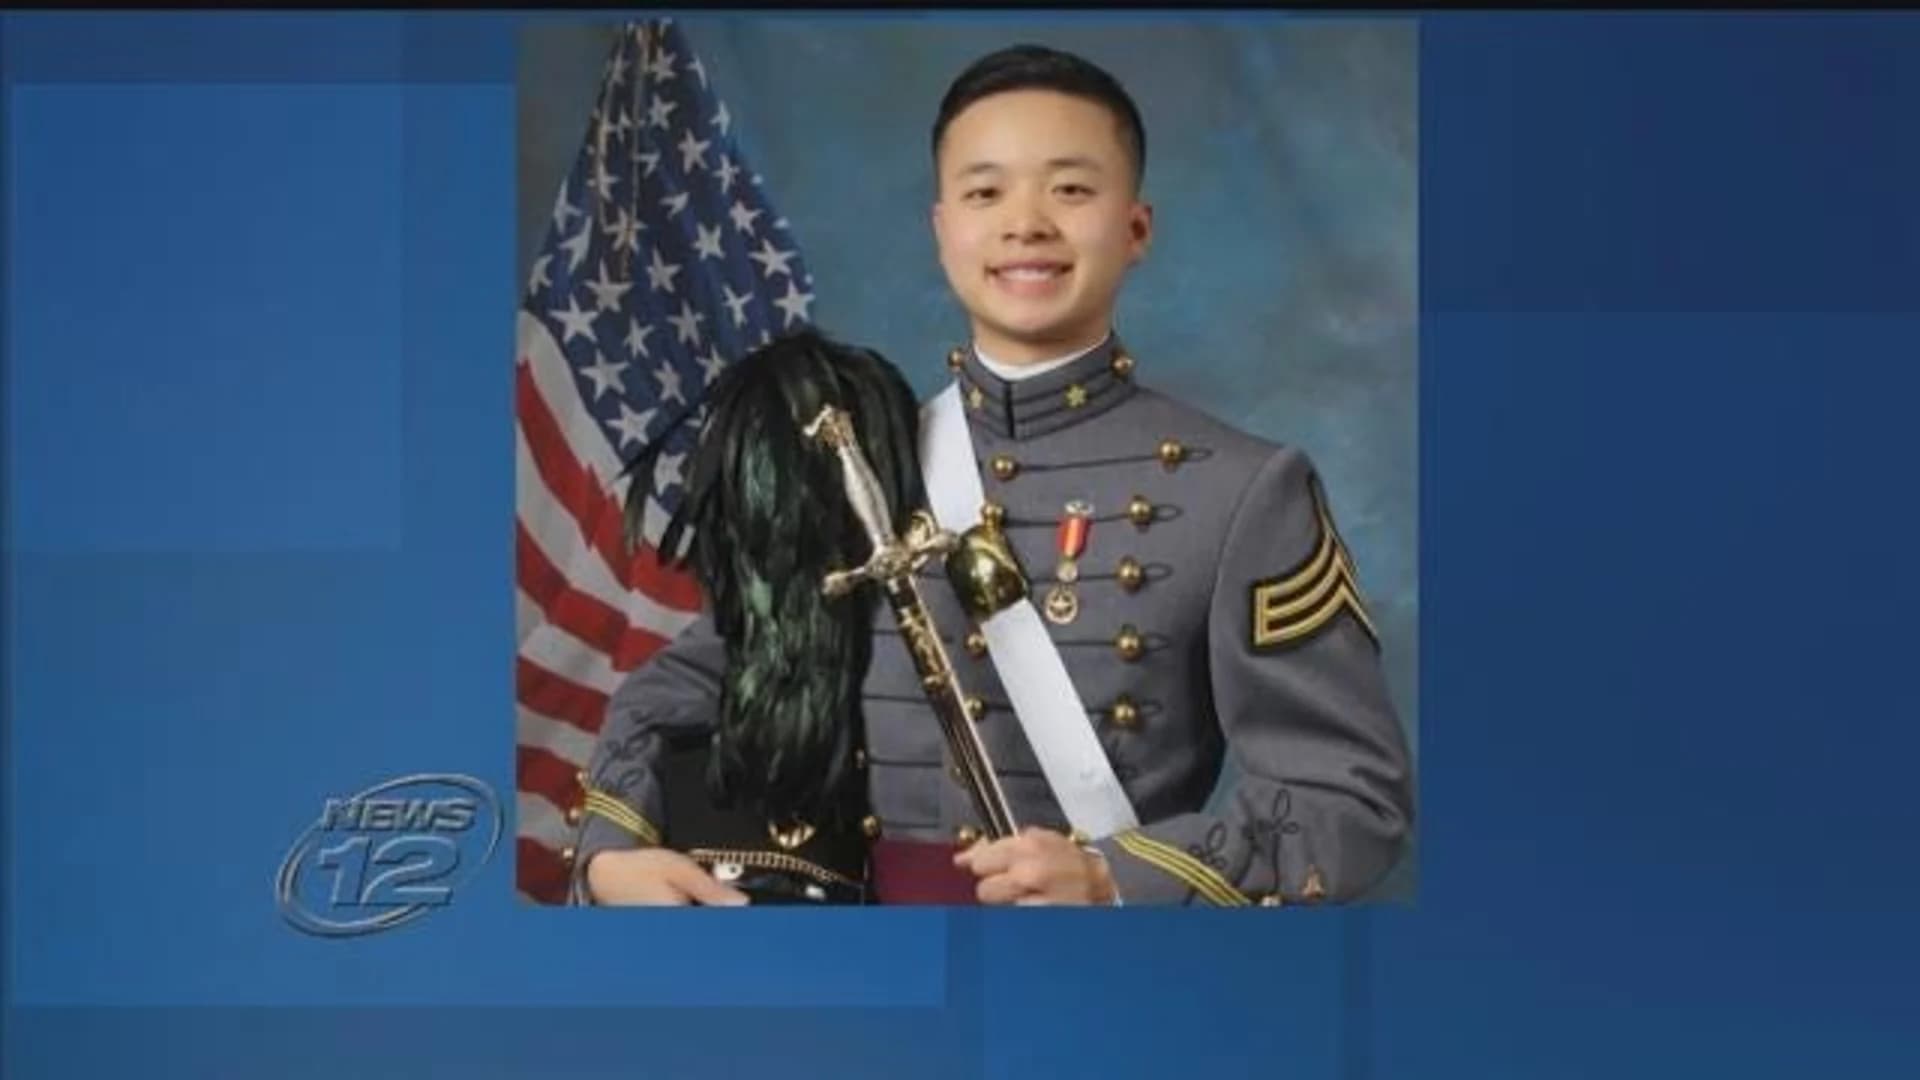 Parents to retrieve sperm from deceased West Point cadet